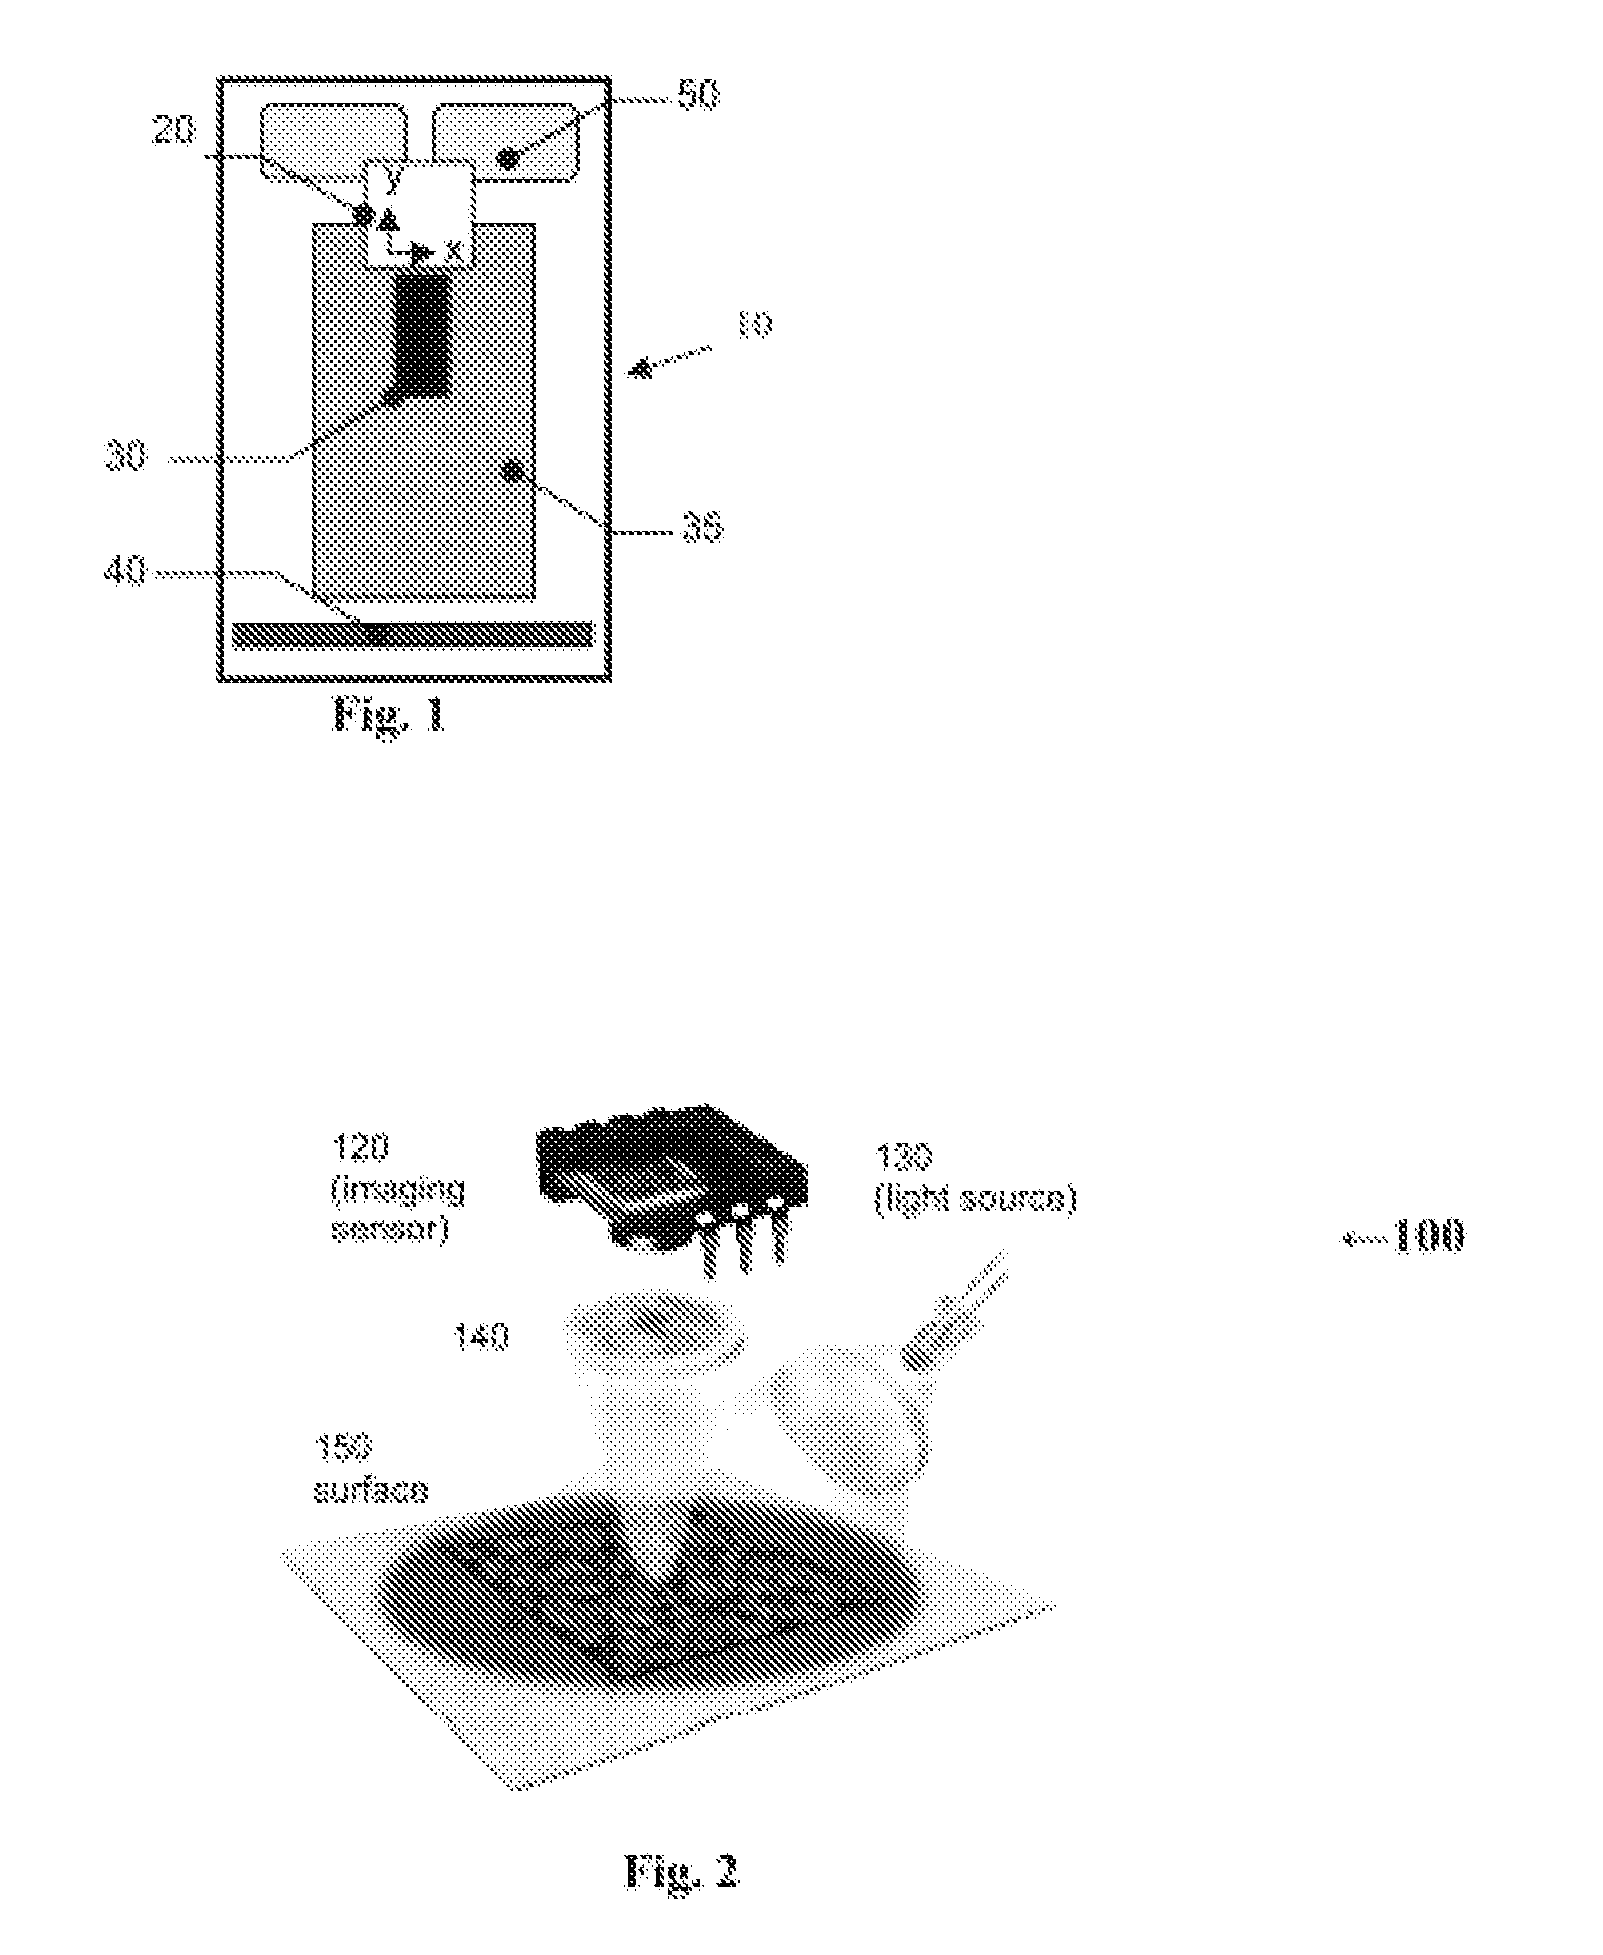 Methods for Improving Print Quality in a Hand-held Printer